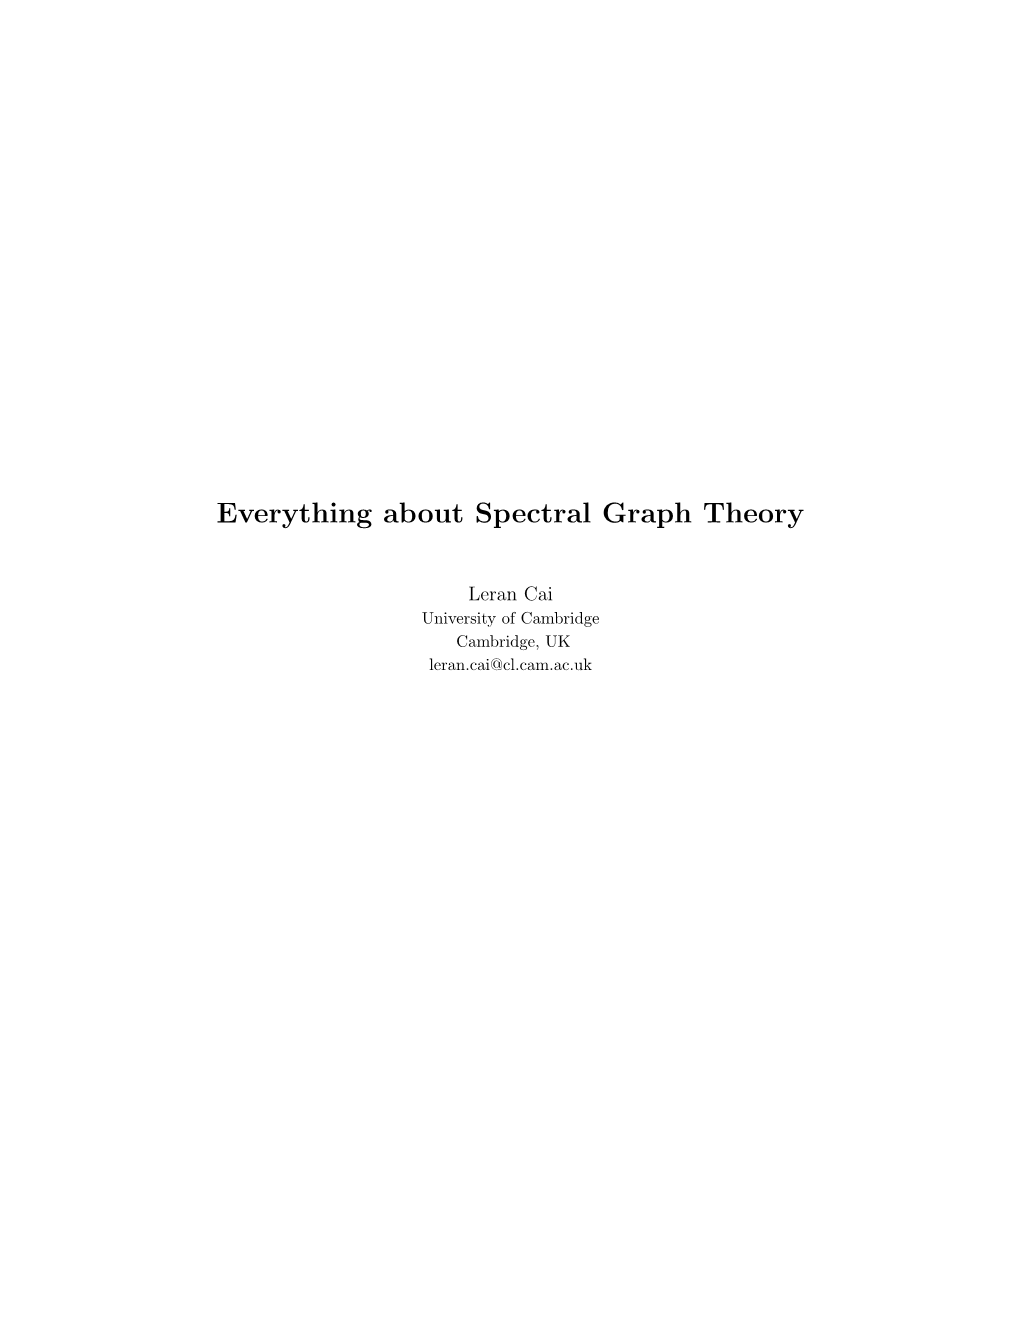 Everything About Spectral Graph Theory